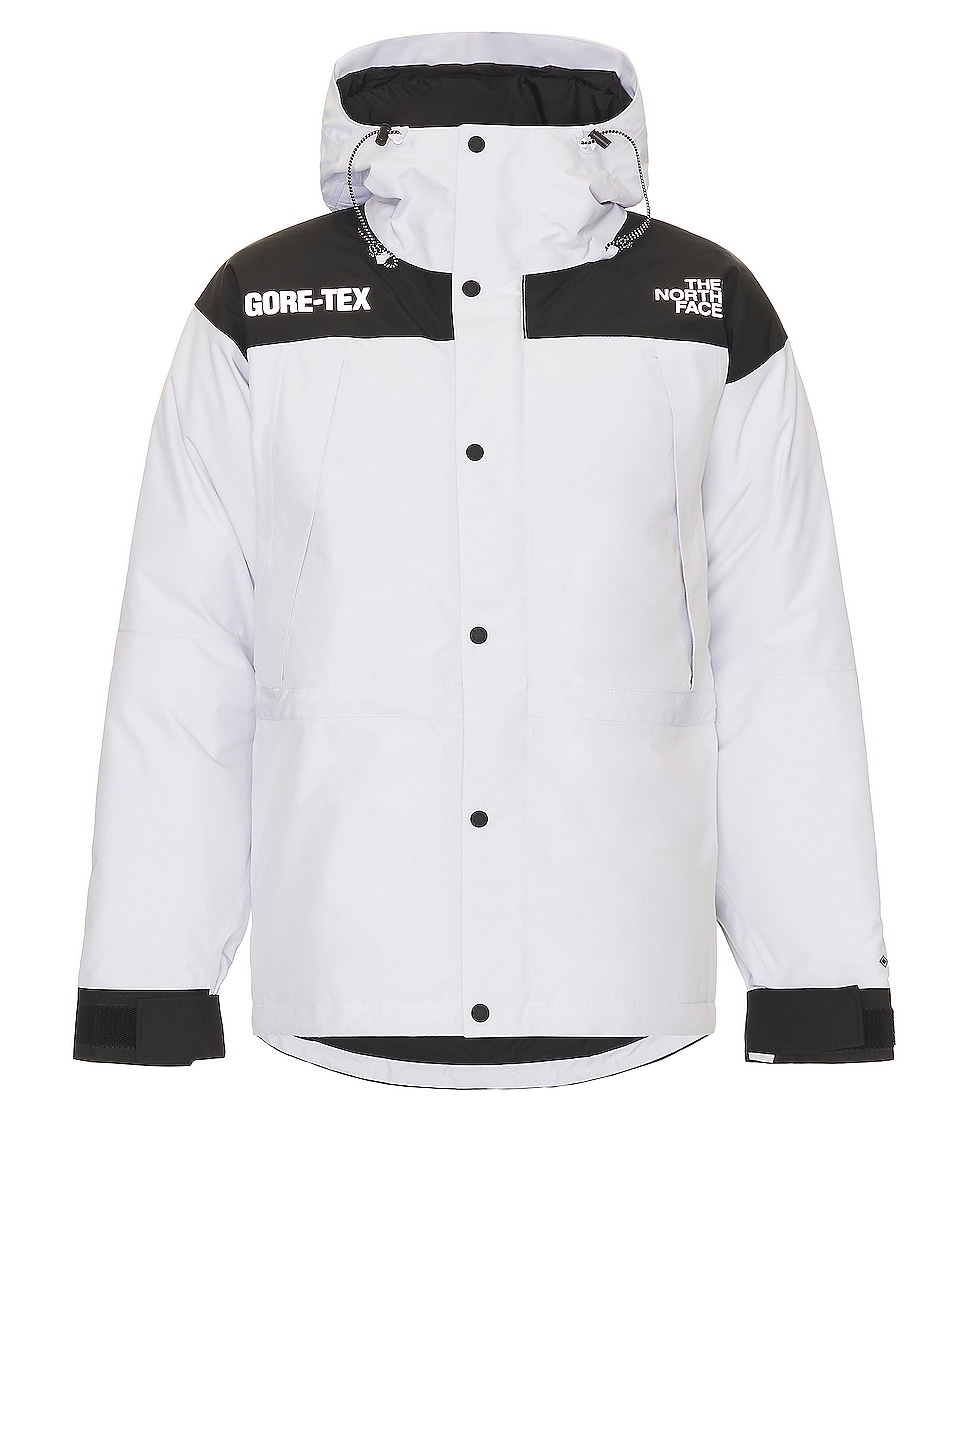 Image 1 of The North Face S Gtx Mountain Guide Insulated Jacket in Tnf White & Silver Reflective